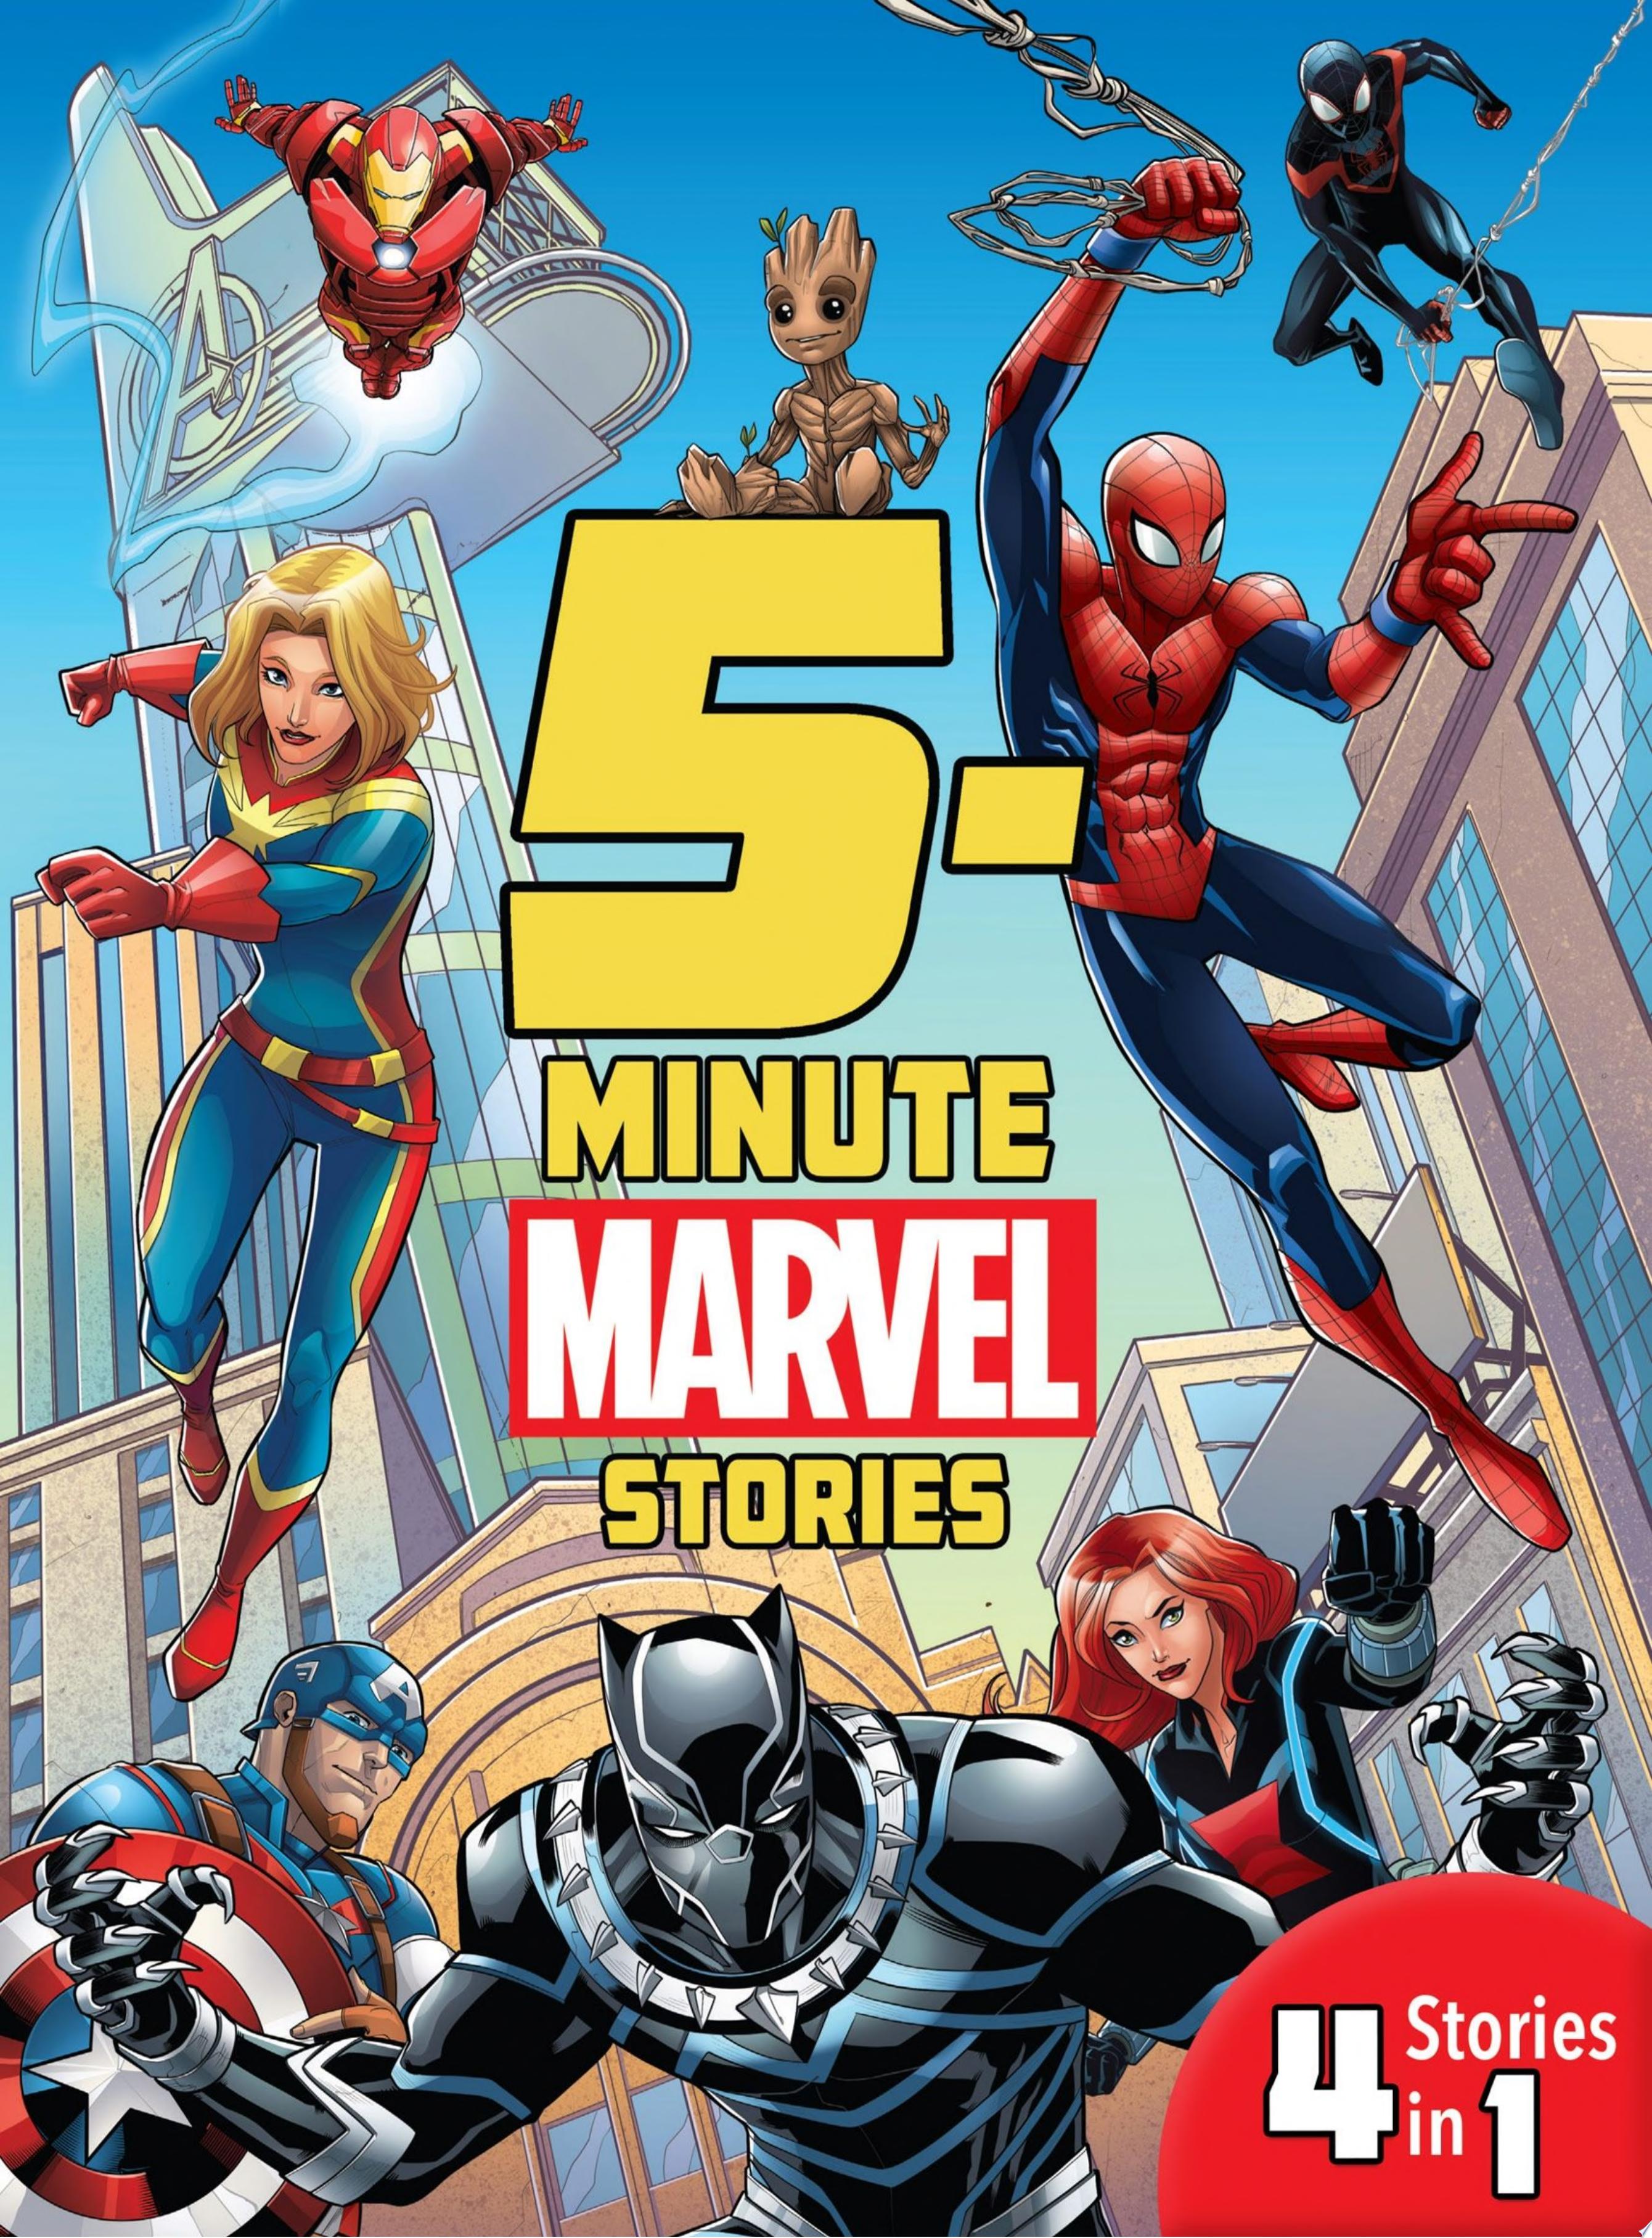 Image for "5-Minute Marvel Stories"